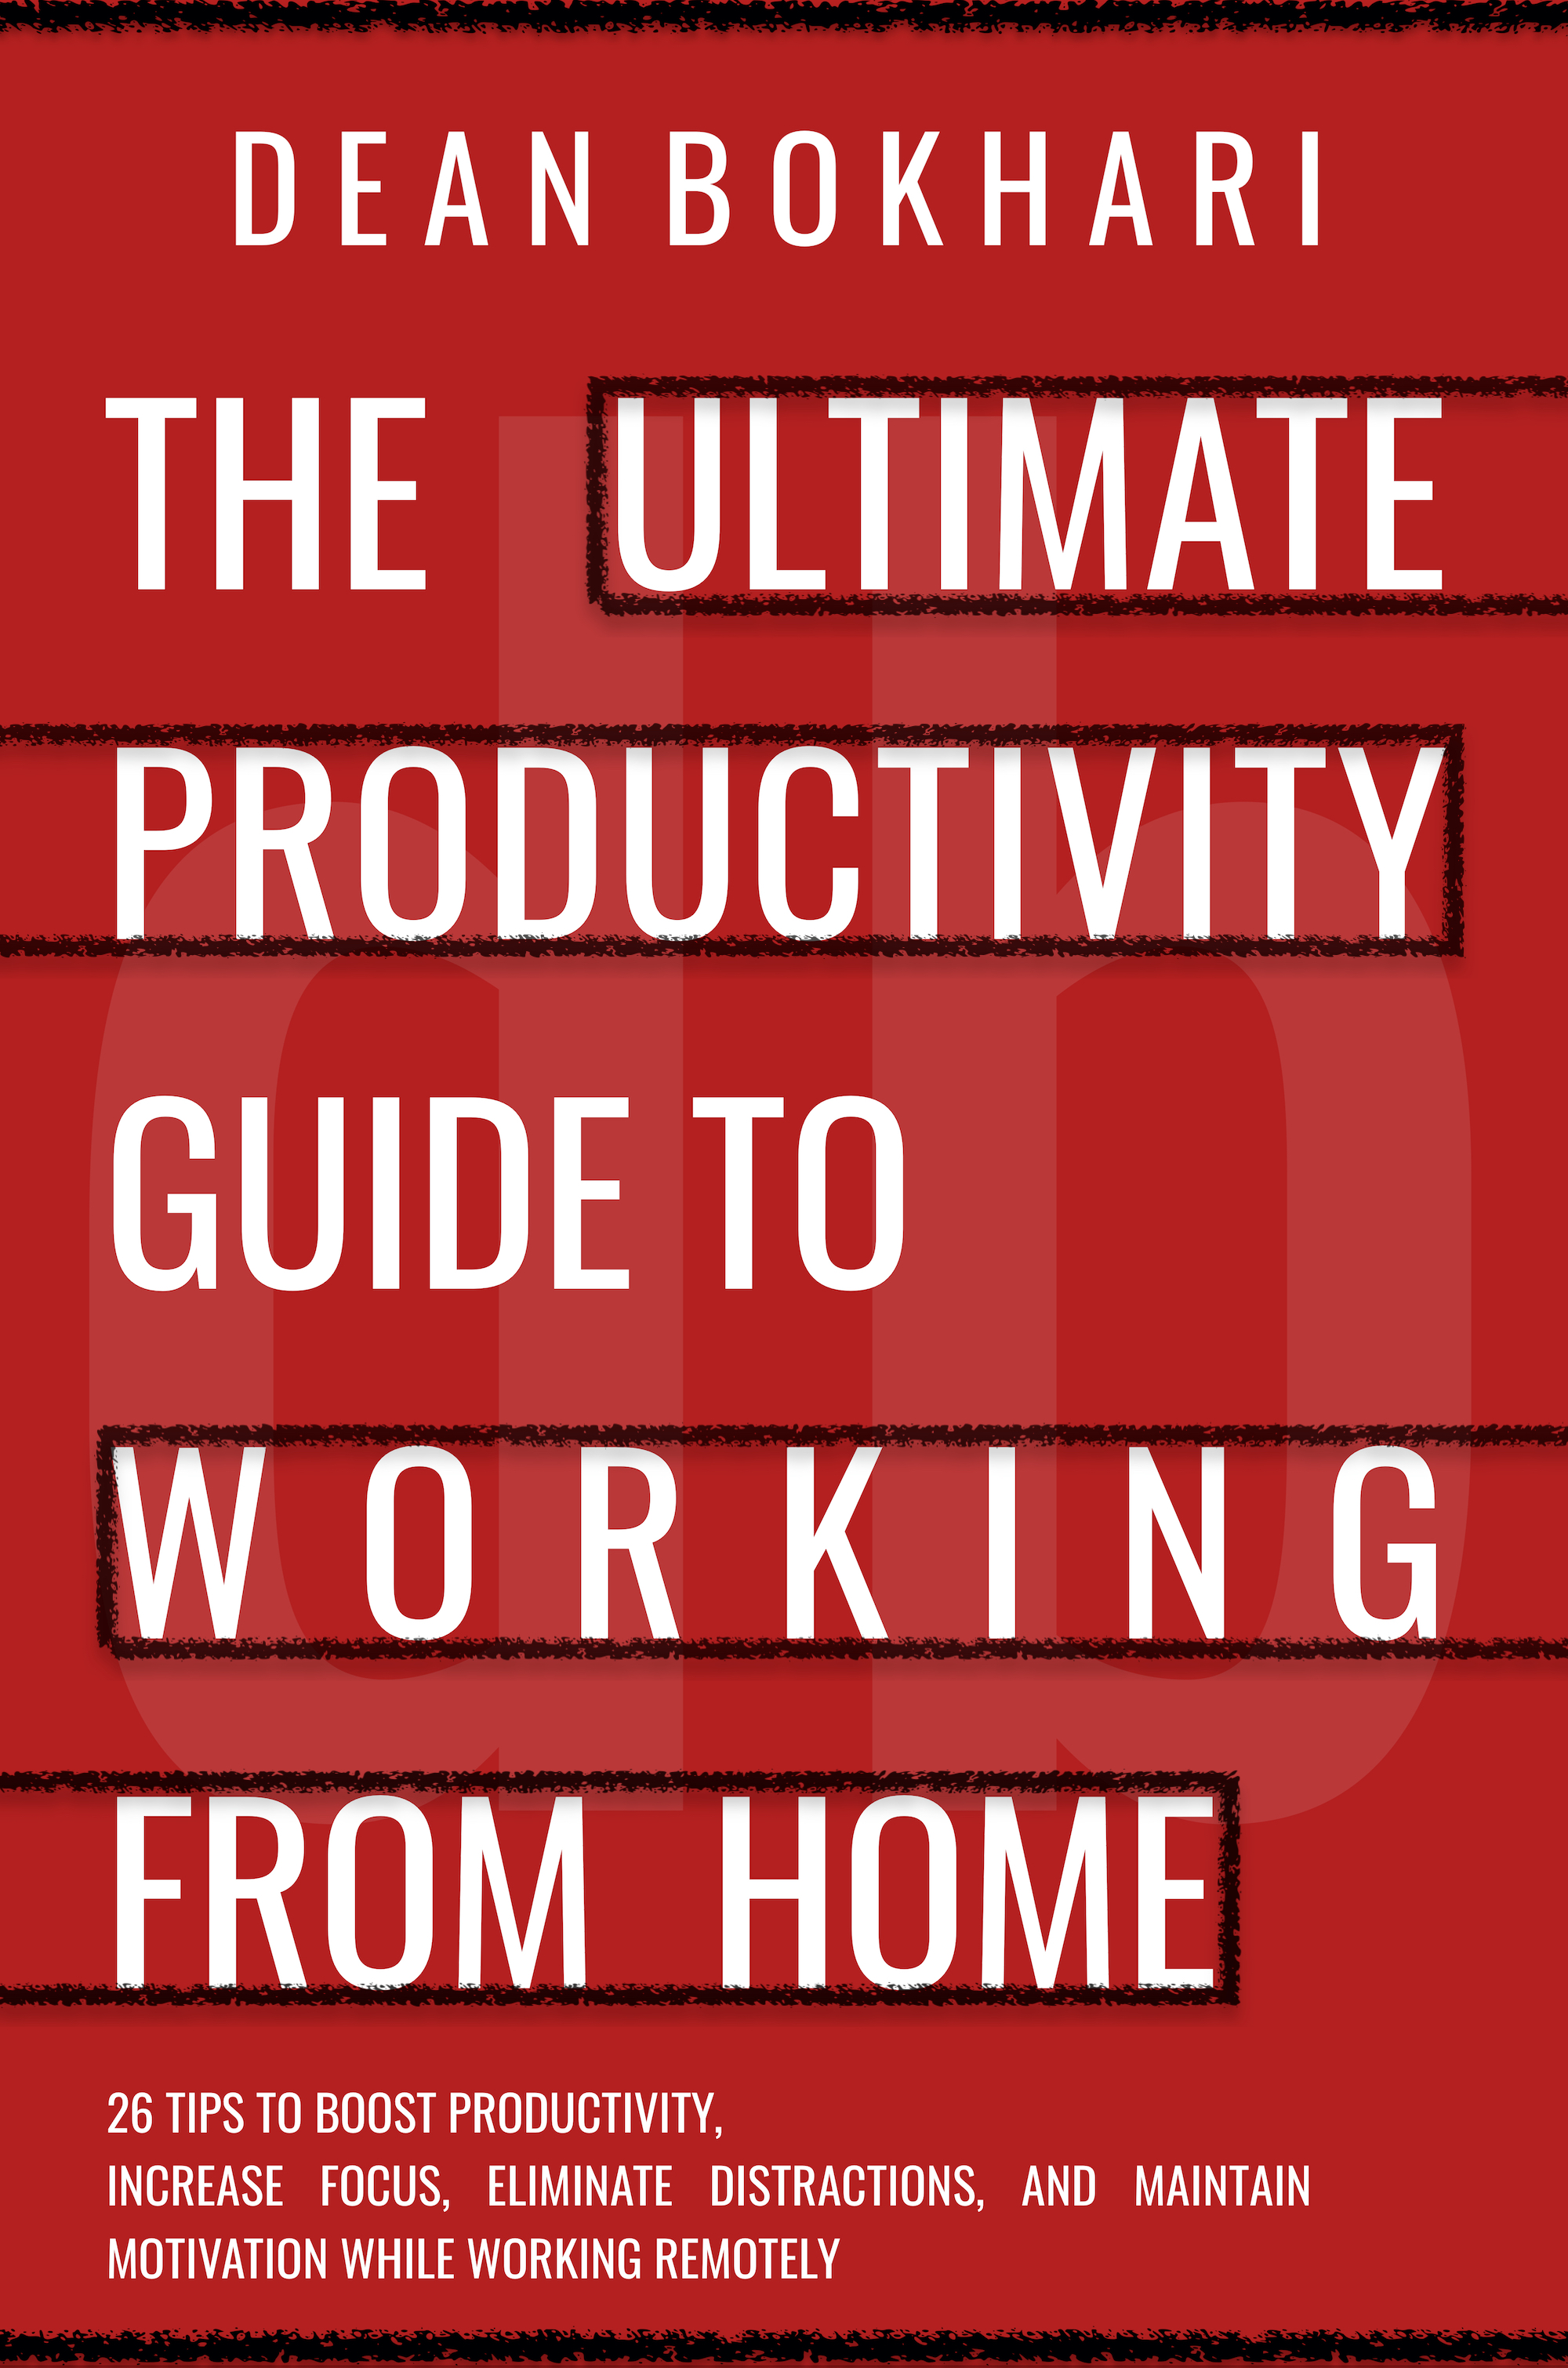 working_from_home_tips